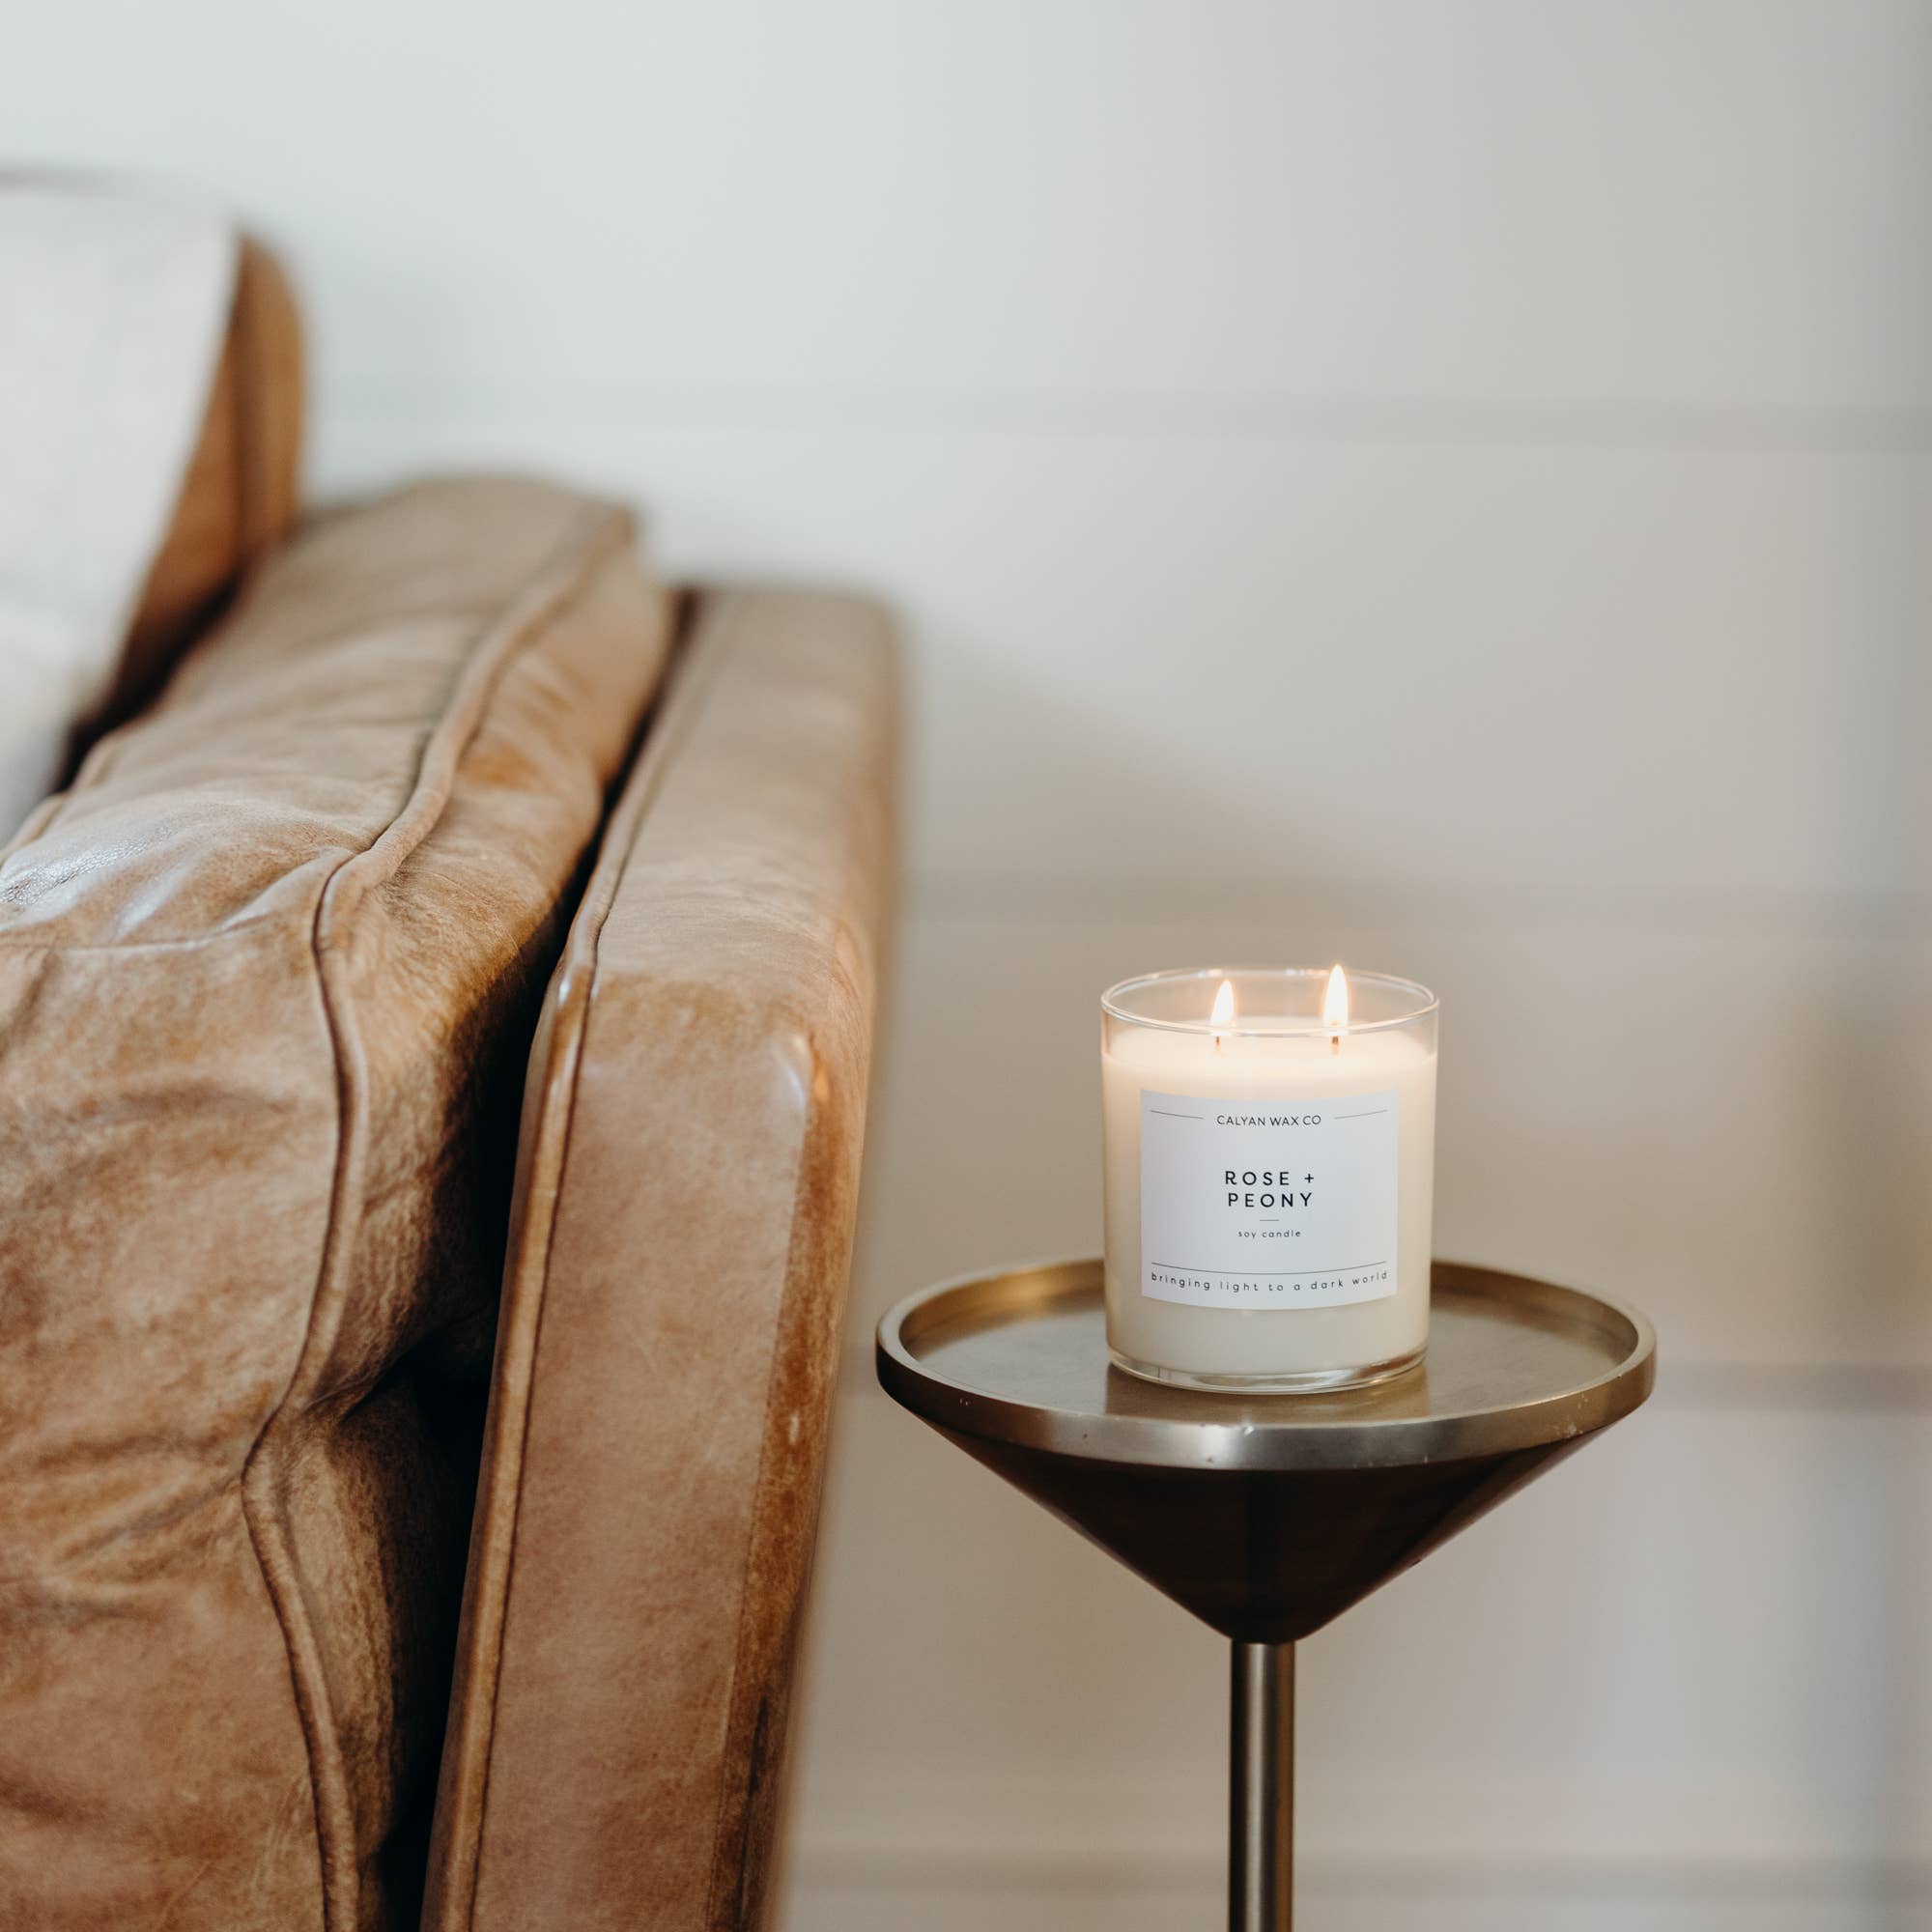 Calyan Wax Co. - Rose + Peony Glass Tumbler Soy Candle